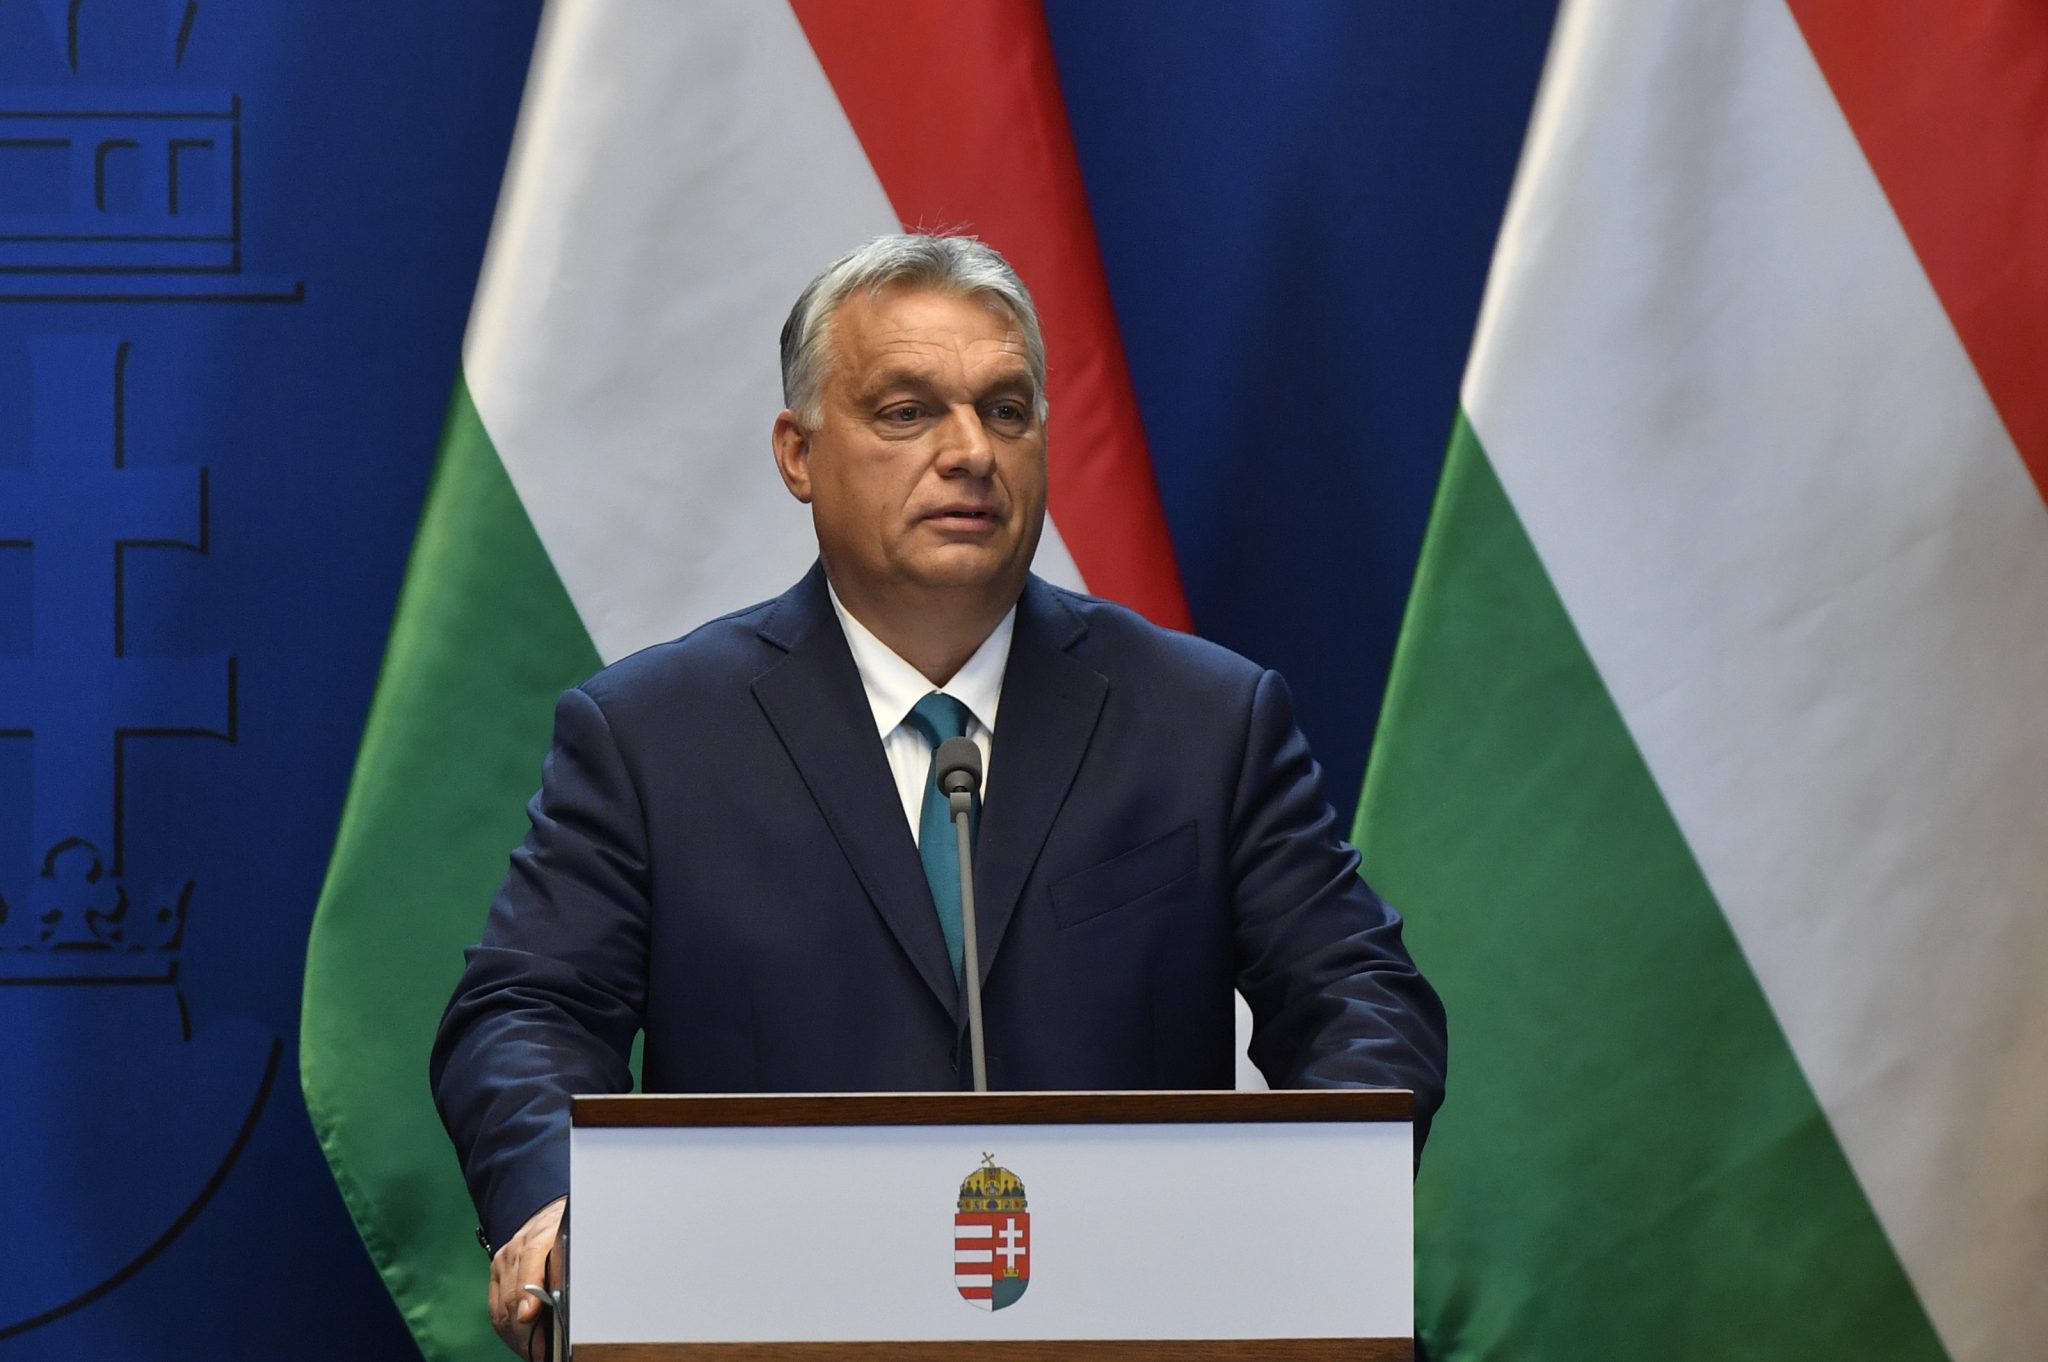 Hungary ‘Better Prepared’ For Pandemic Than In Spring, Say PM Orbán